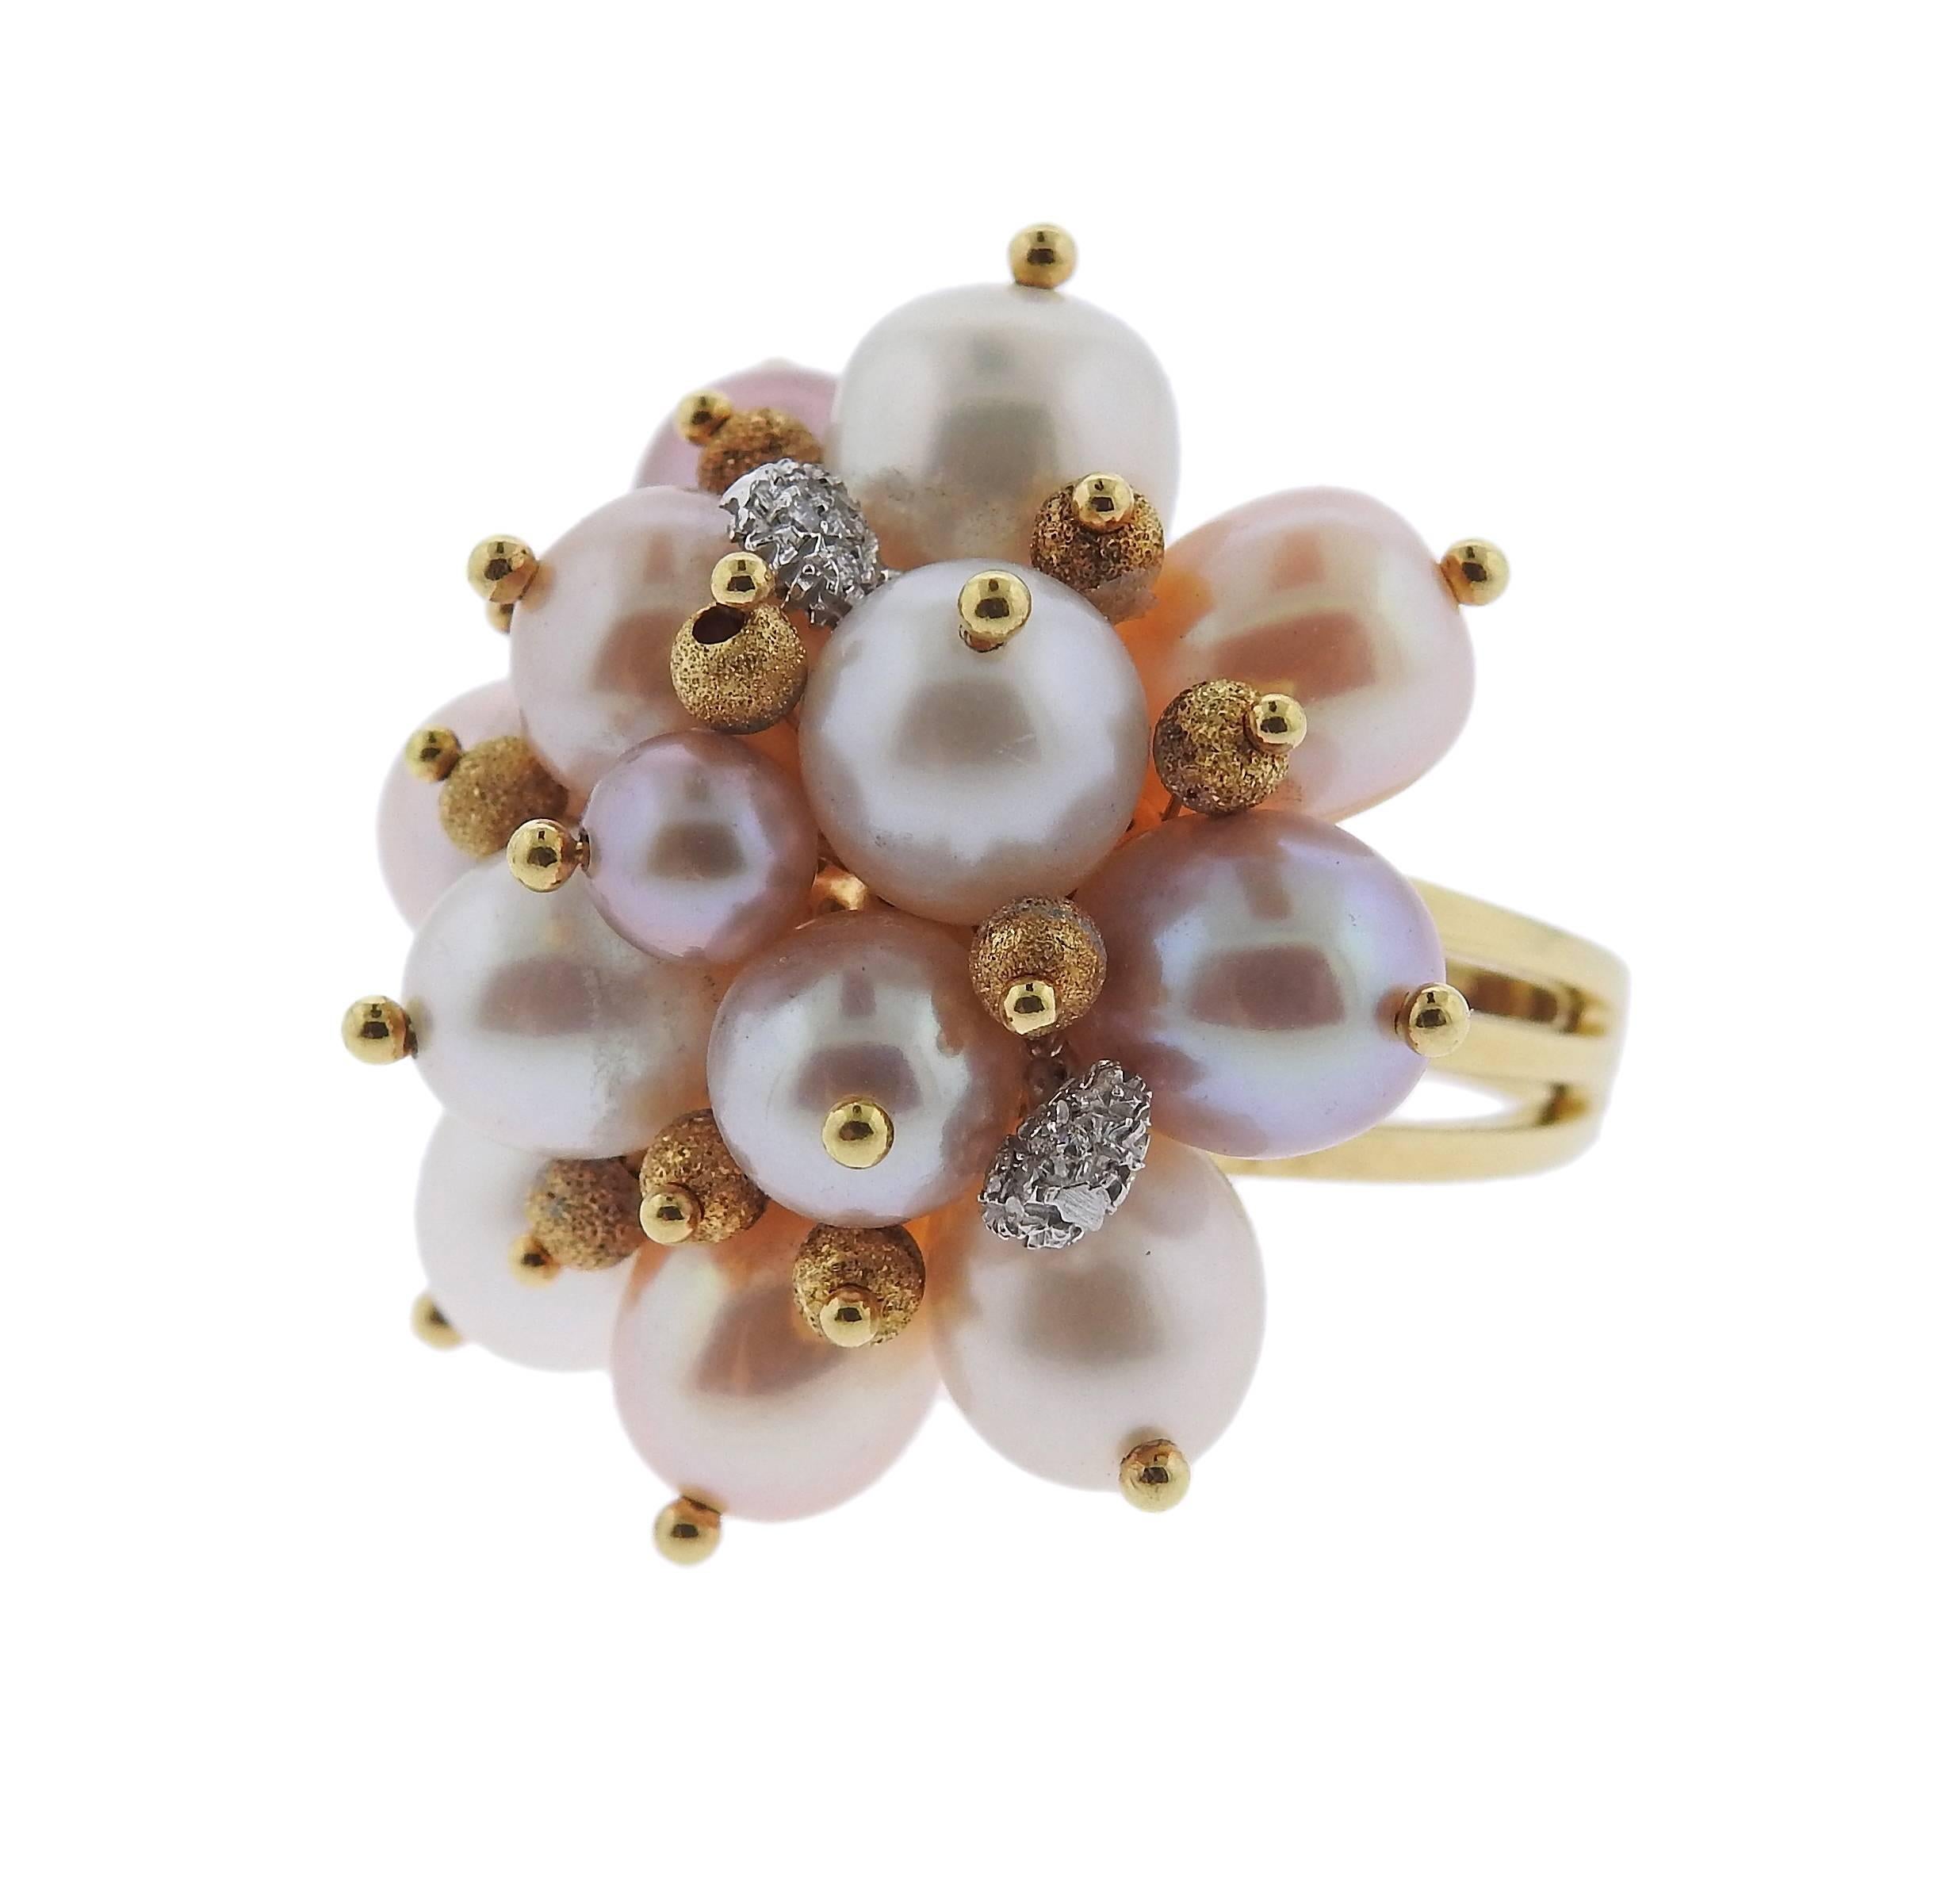 An 18k gold cocktail ring, crafted by Zoccai, set with  5.6mm to 8.4mm pearls and approx. 0.08ctw in diamonds. Ring is a size 6 3/4, ring top is 31mm x 32mm. Marked: Zoccai, 750, 314VI. Weight of the piece - 22.9 grams. 